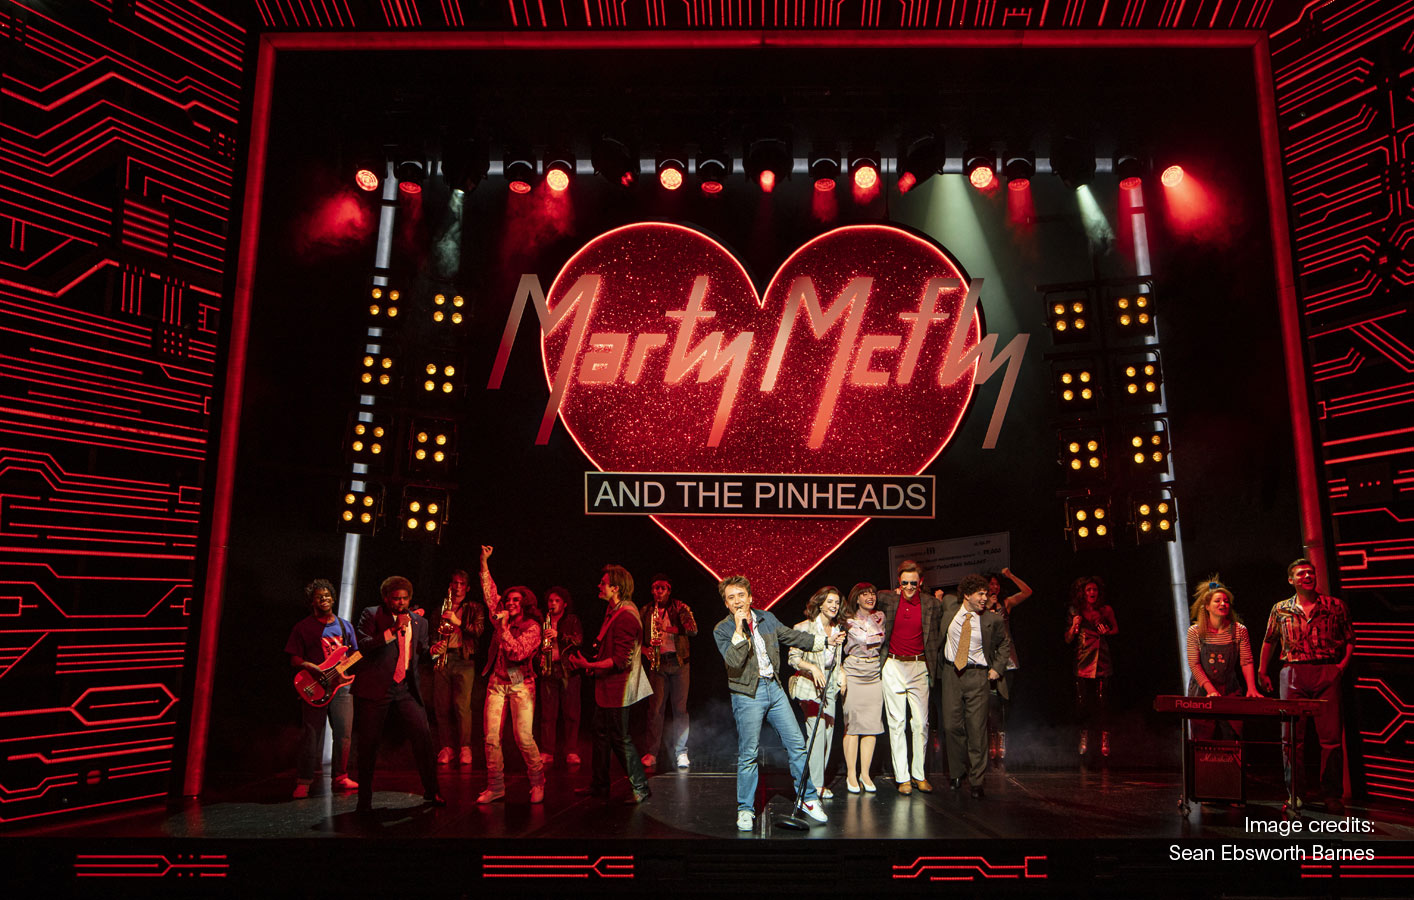 ‘Back to the Future’ musical arrives at the West End with disguise driving its VFX-filled video set design